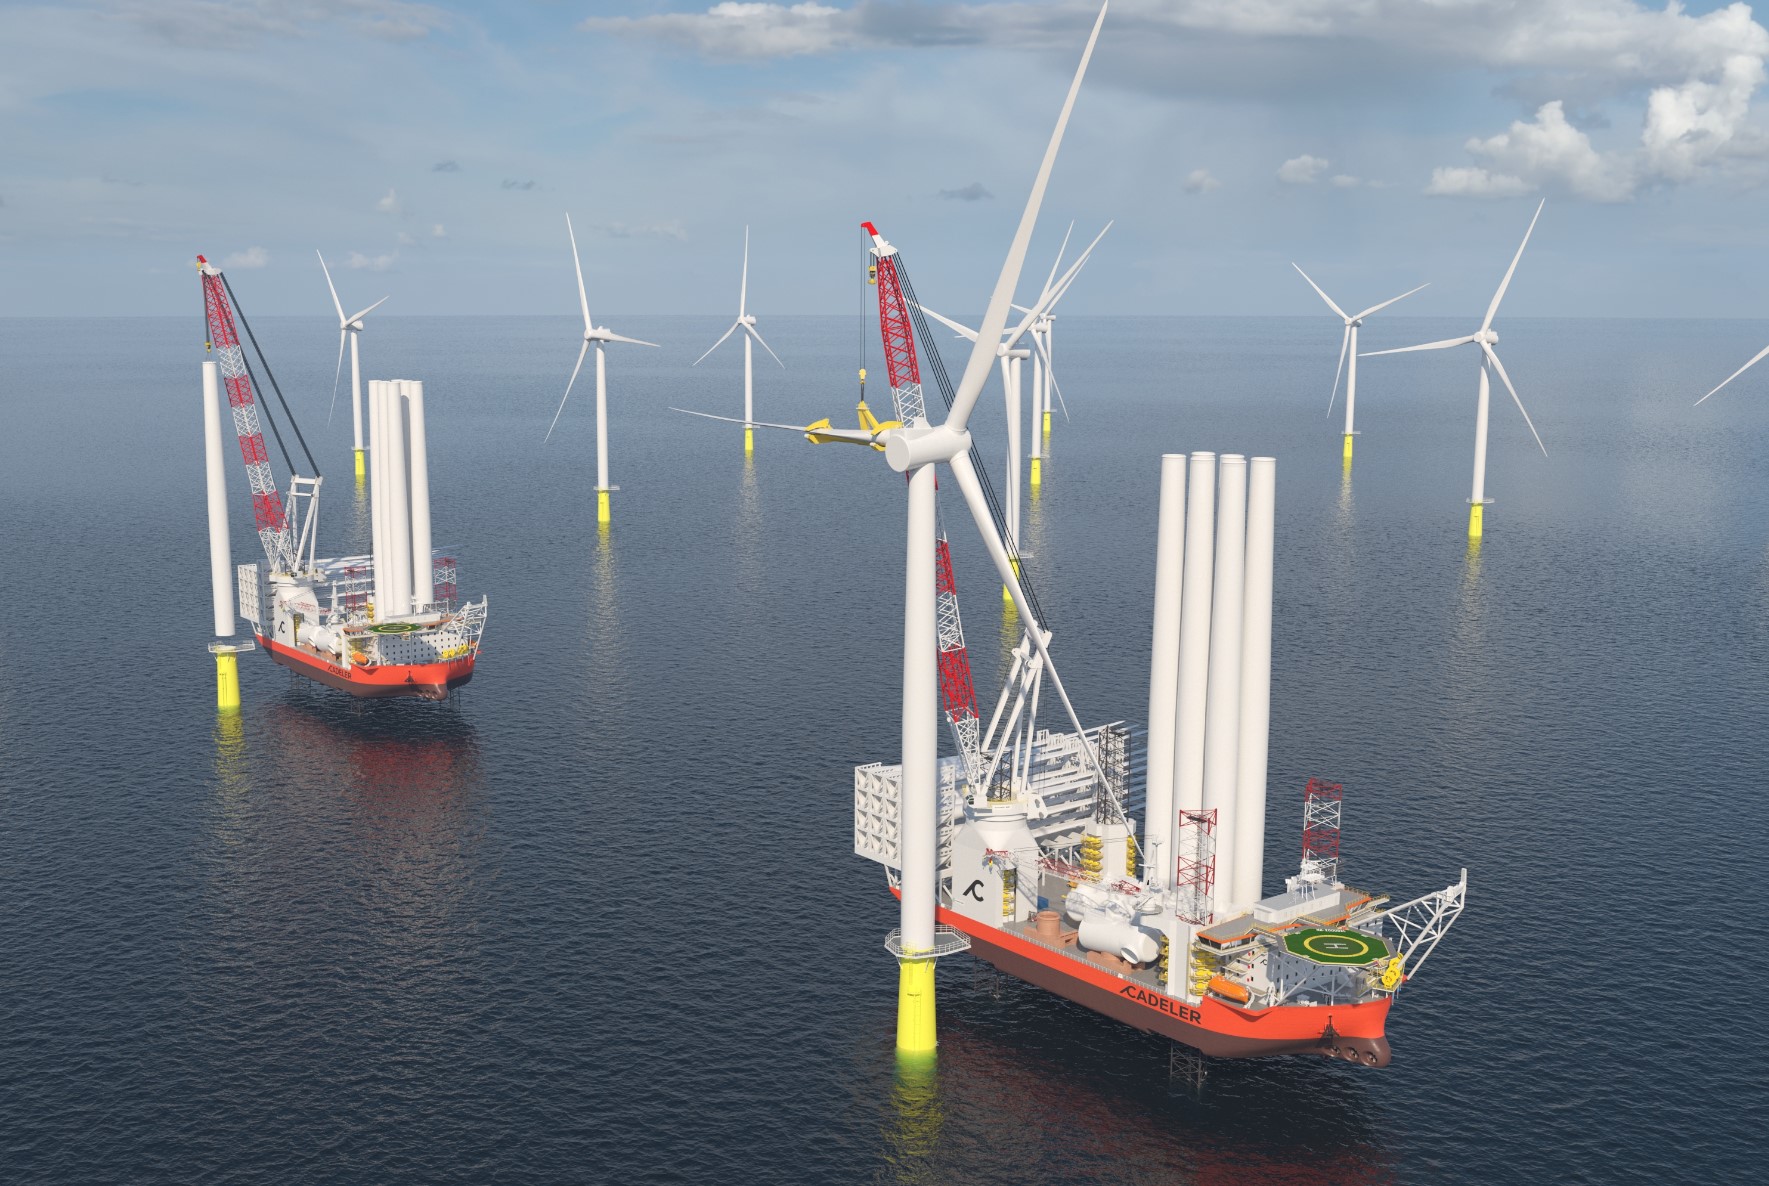 An image rendering Cadeler's new X-class vessels at sea